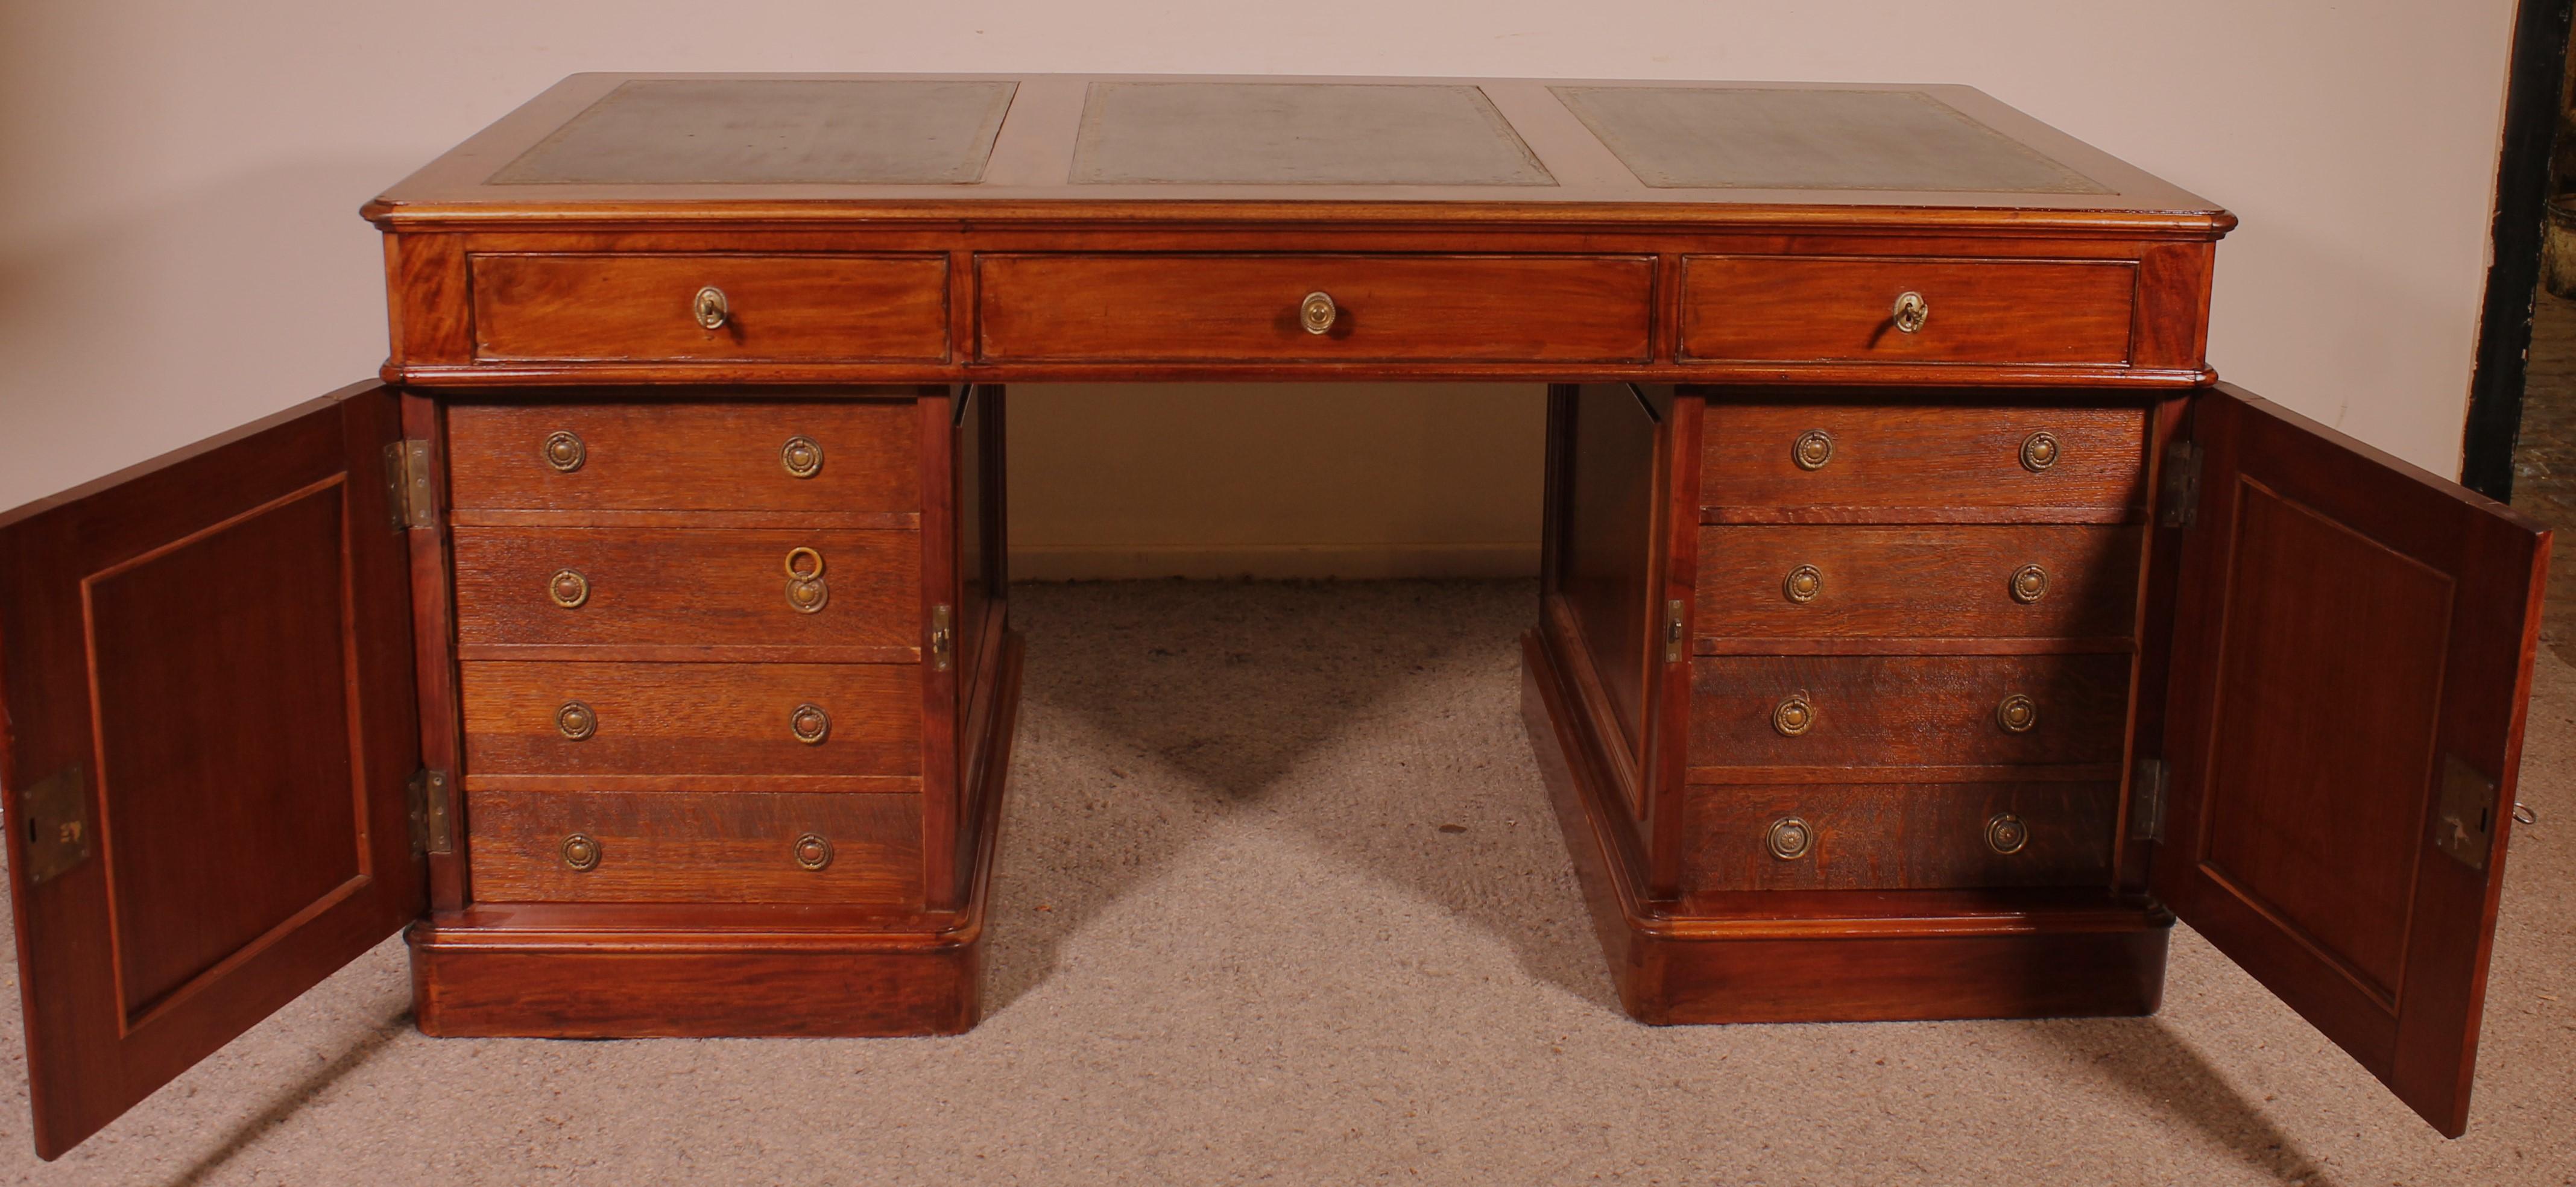 French Large Pedestal Desk In Mahogany From The 19th Century For Sale